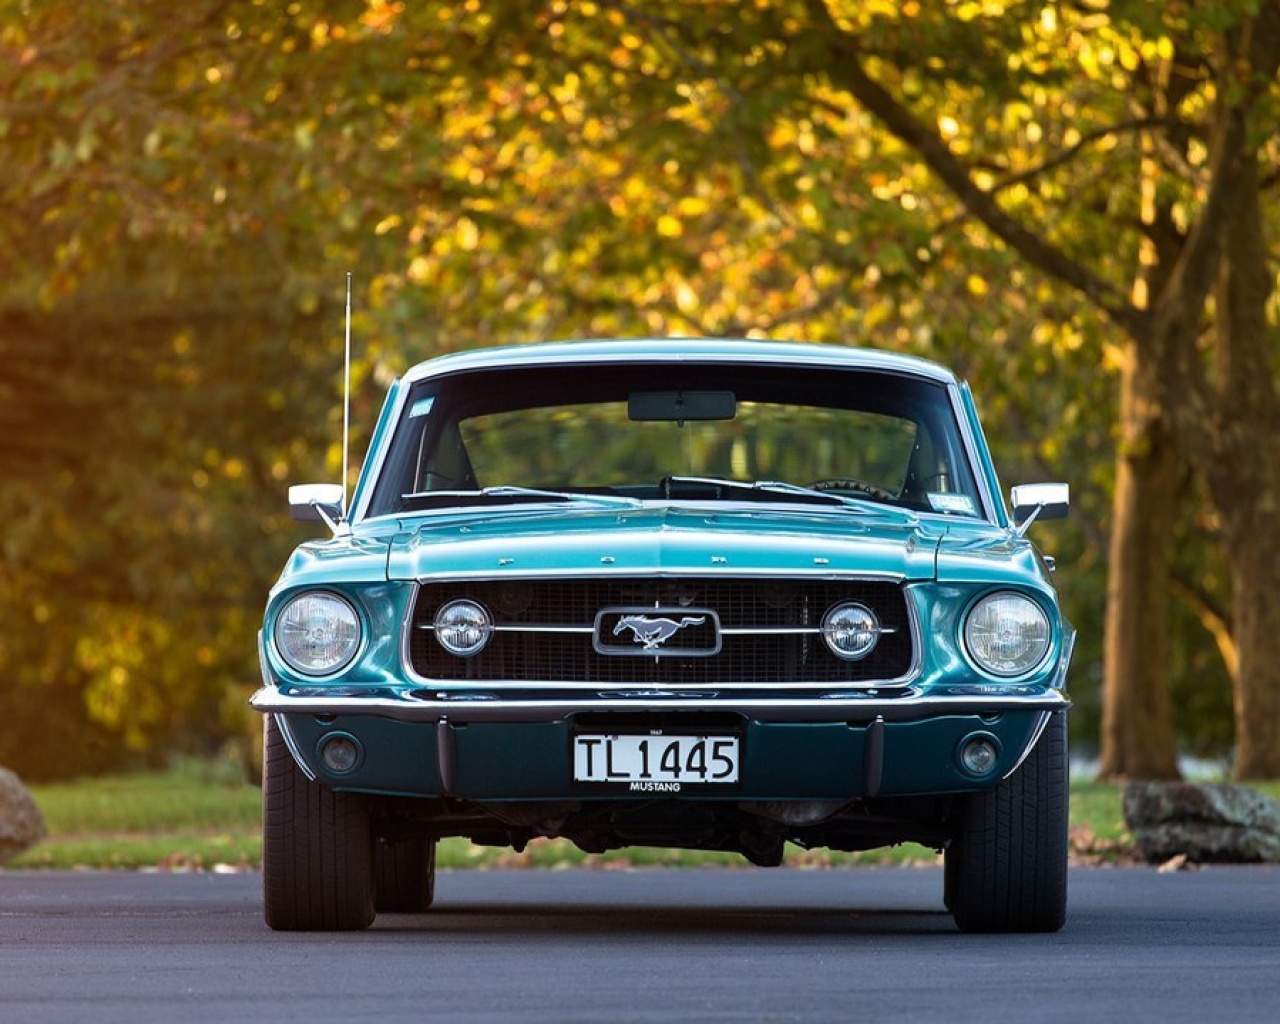 Ford Mustang First Generation wallpaper 1280x1024